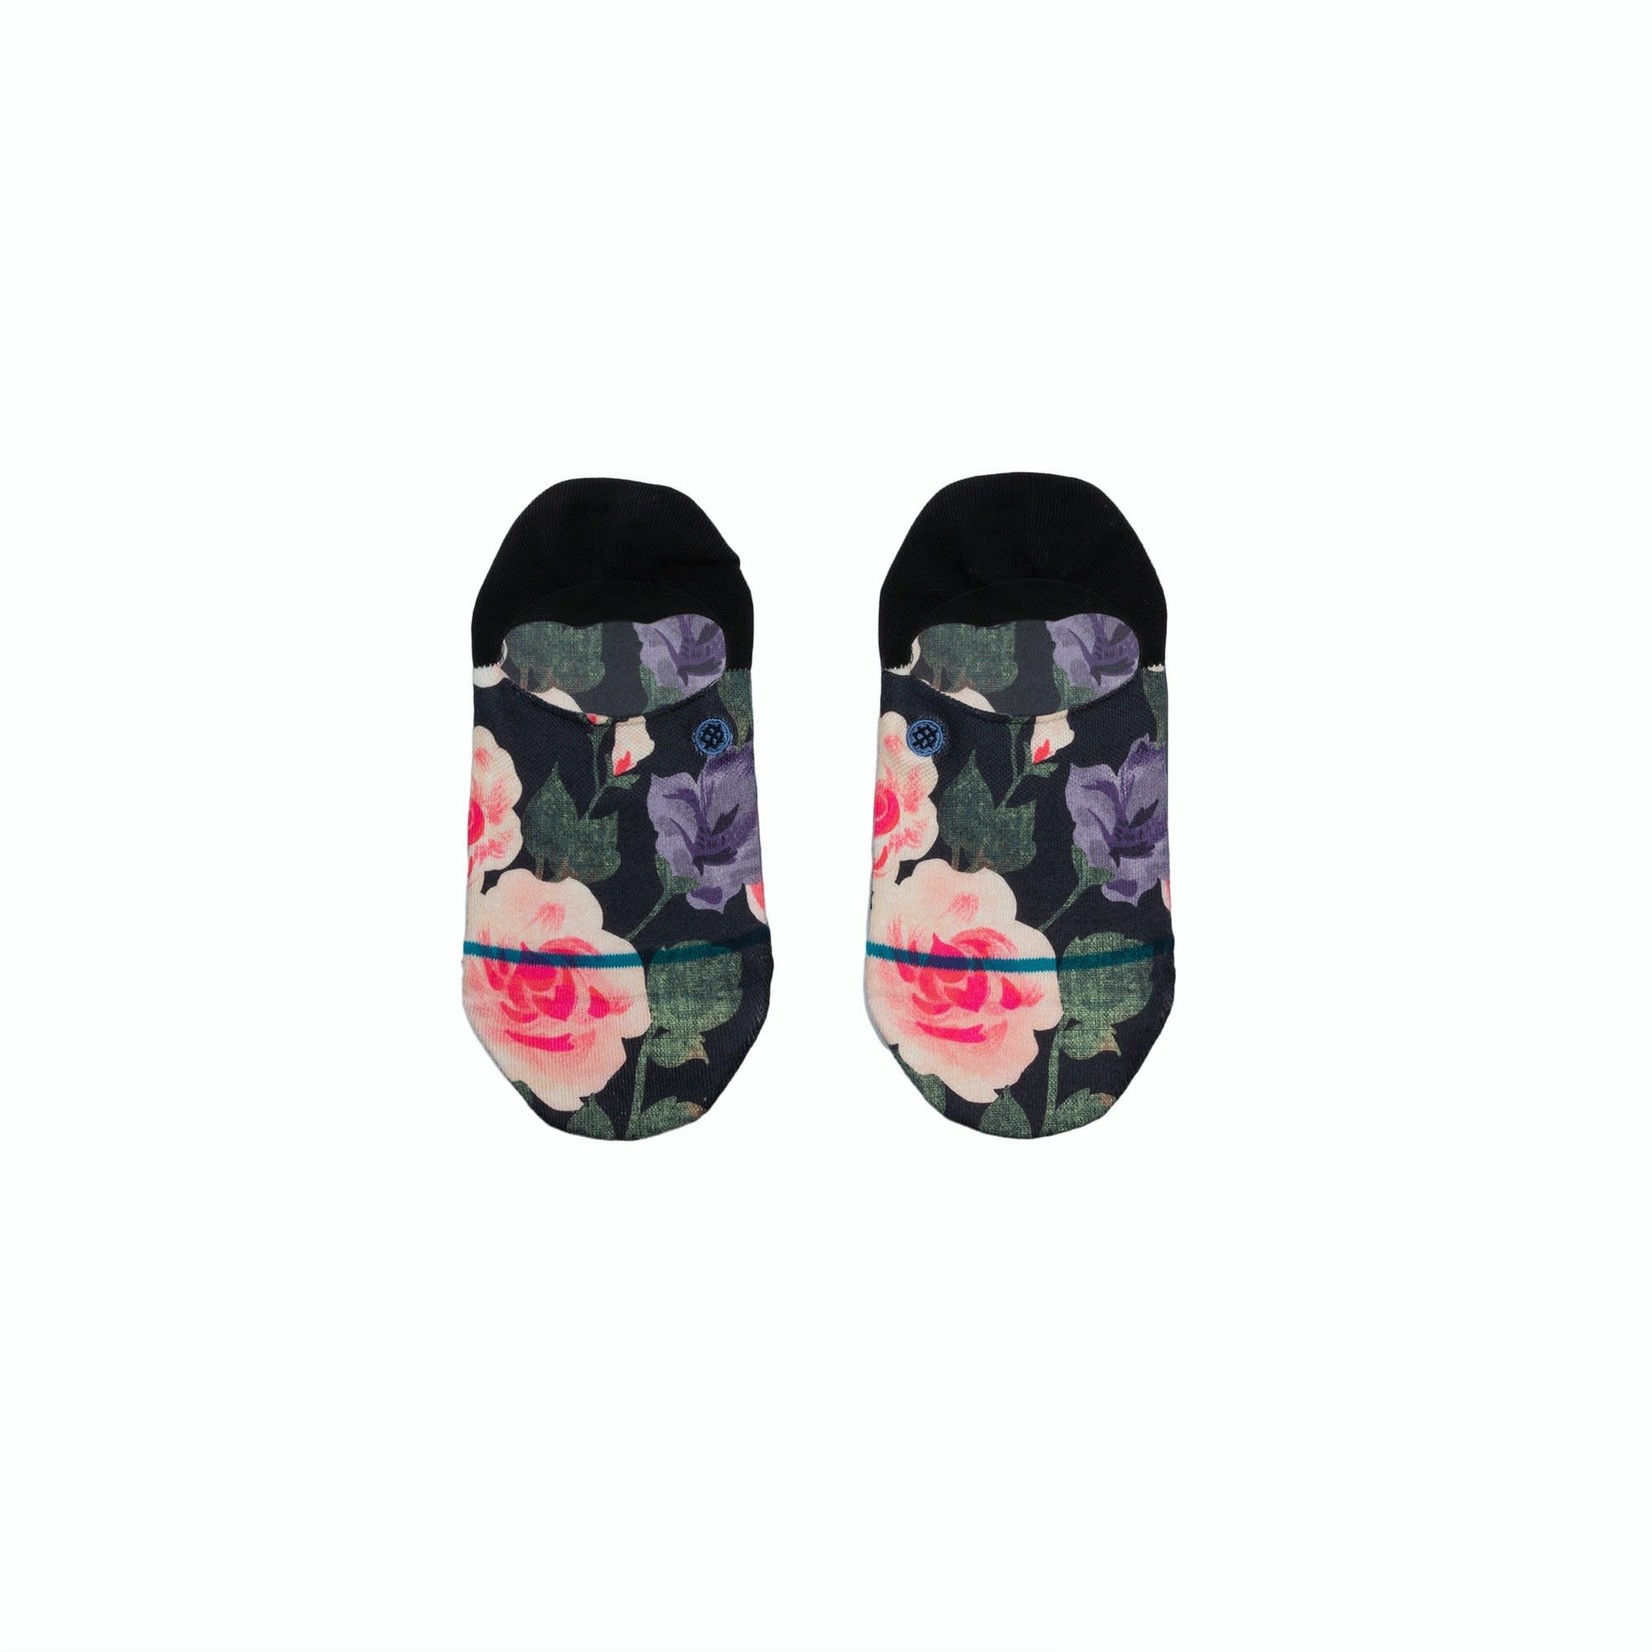 Stance Stance Socks Meet You There M (Men 6-8.5 / Women 8-10.5)